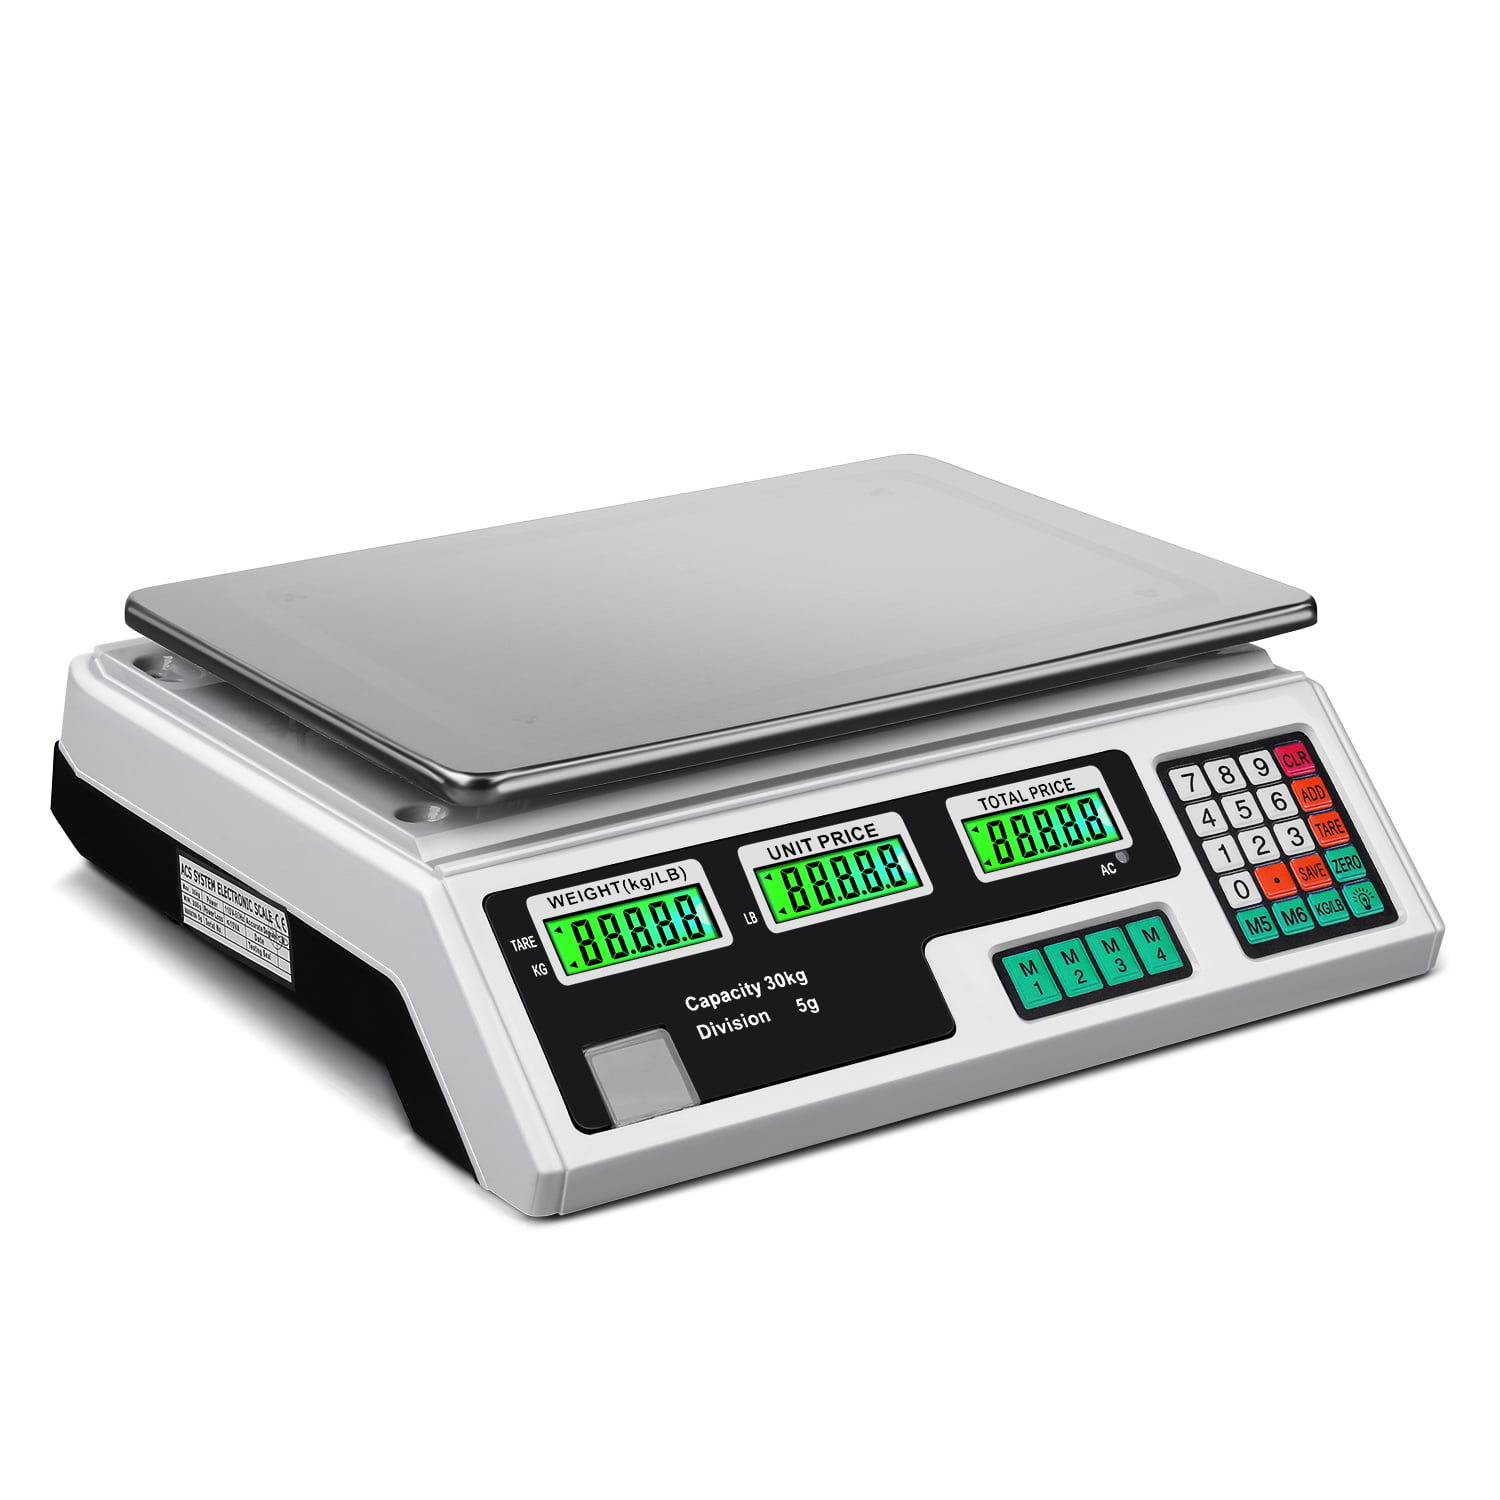 CAMRY Digital Food Scale 66lb / 30kg Commercial Food Meat Fruit Produce  Price Computing Scale for Farmers Market, Meat Shop, Deli, Retail Outlets